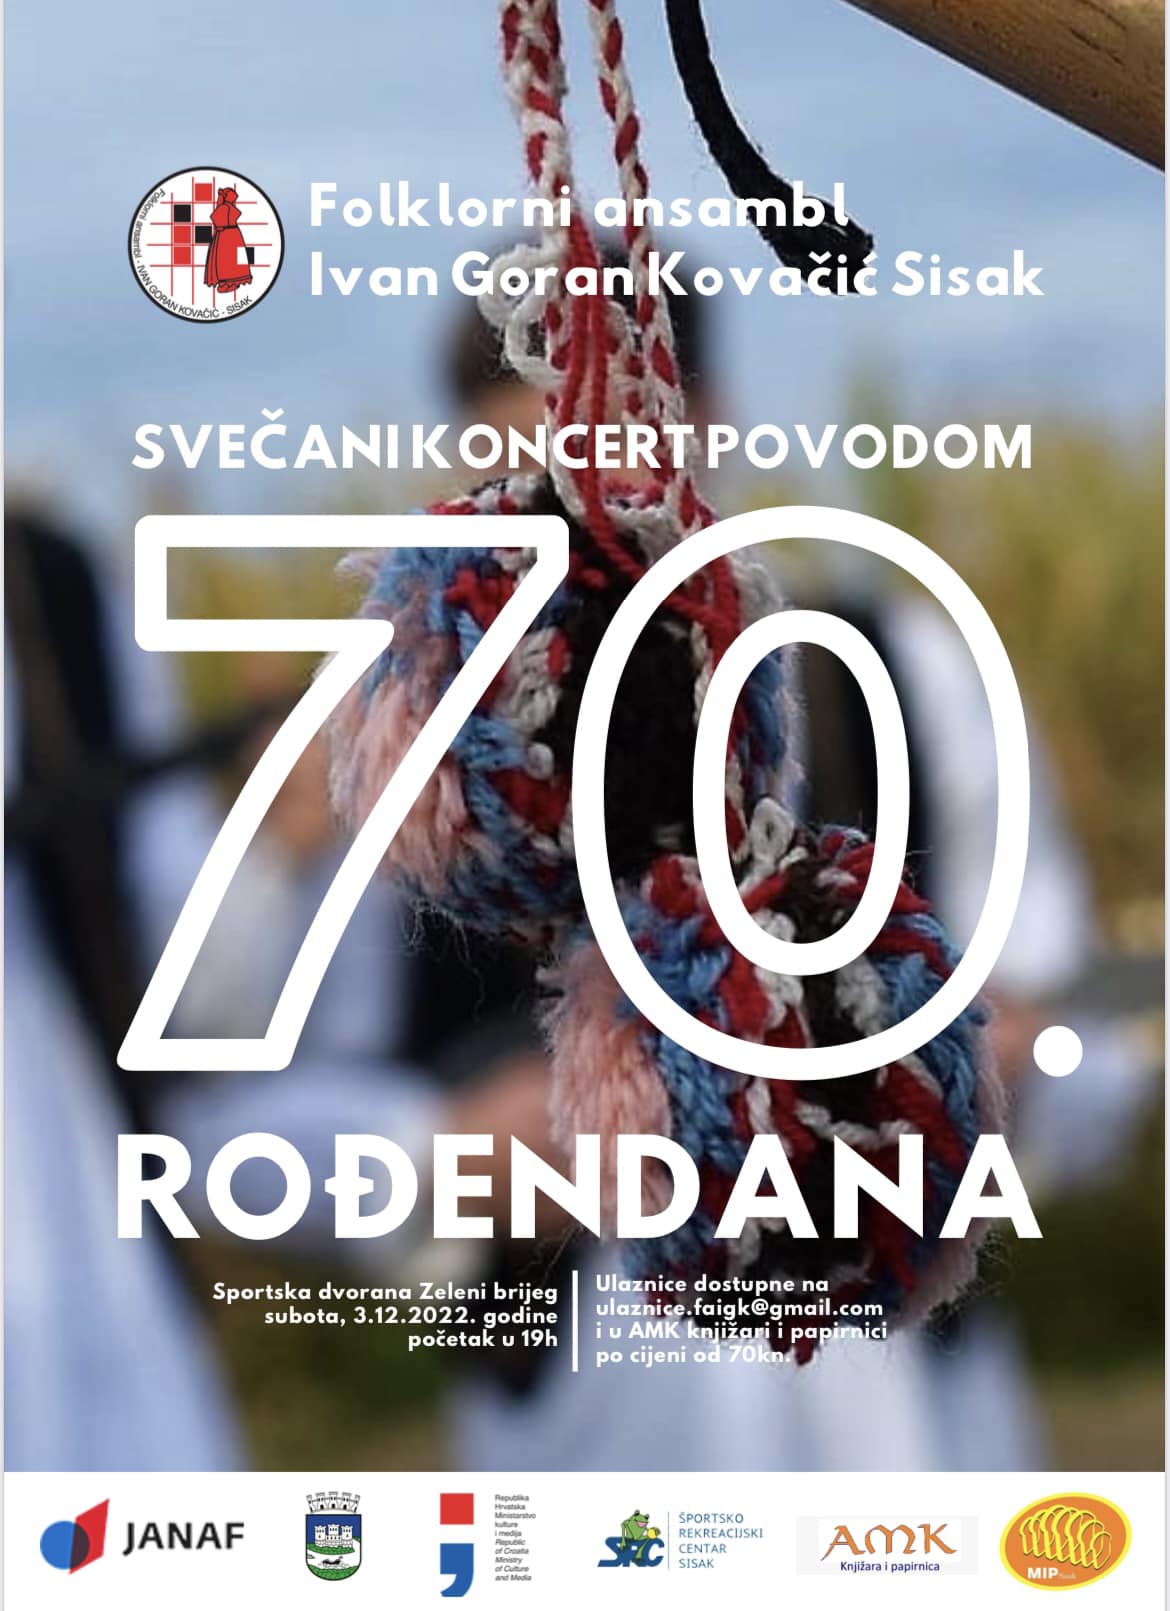 You are currently viewing Koncert povodom 70. rođendana